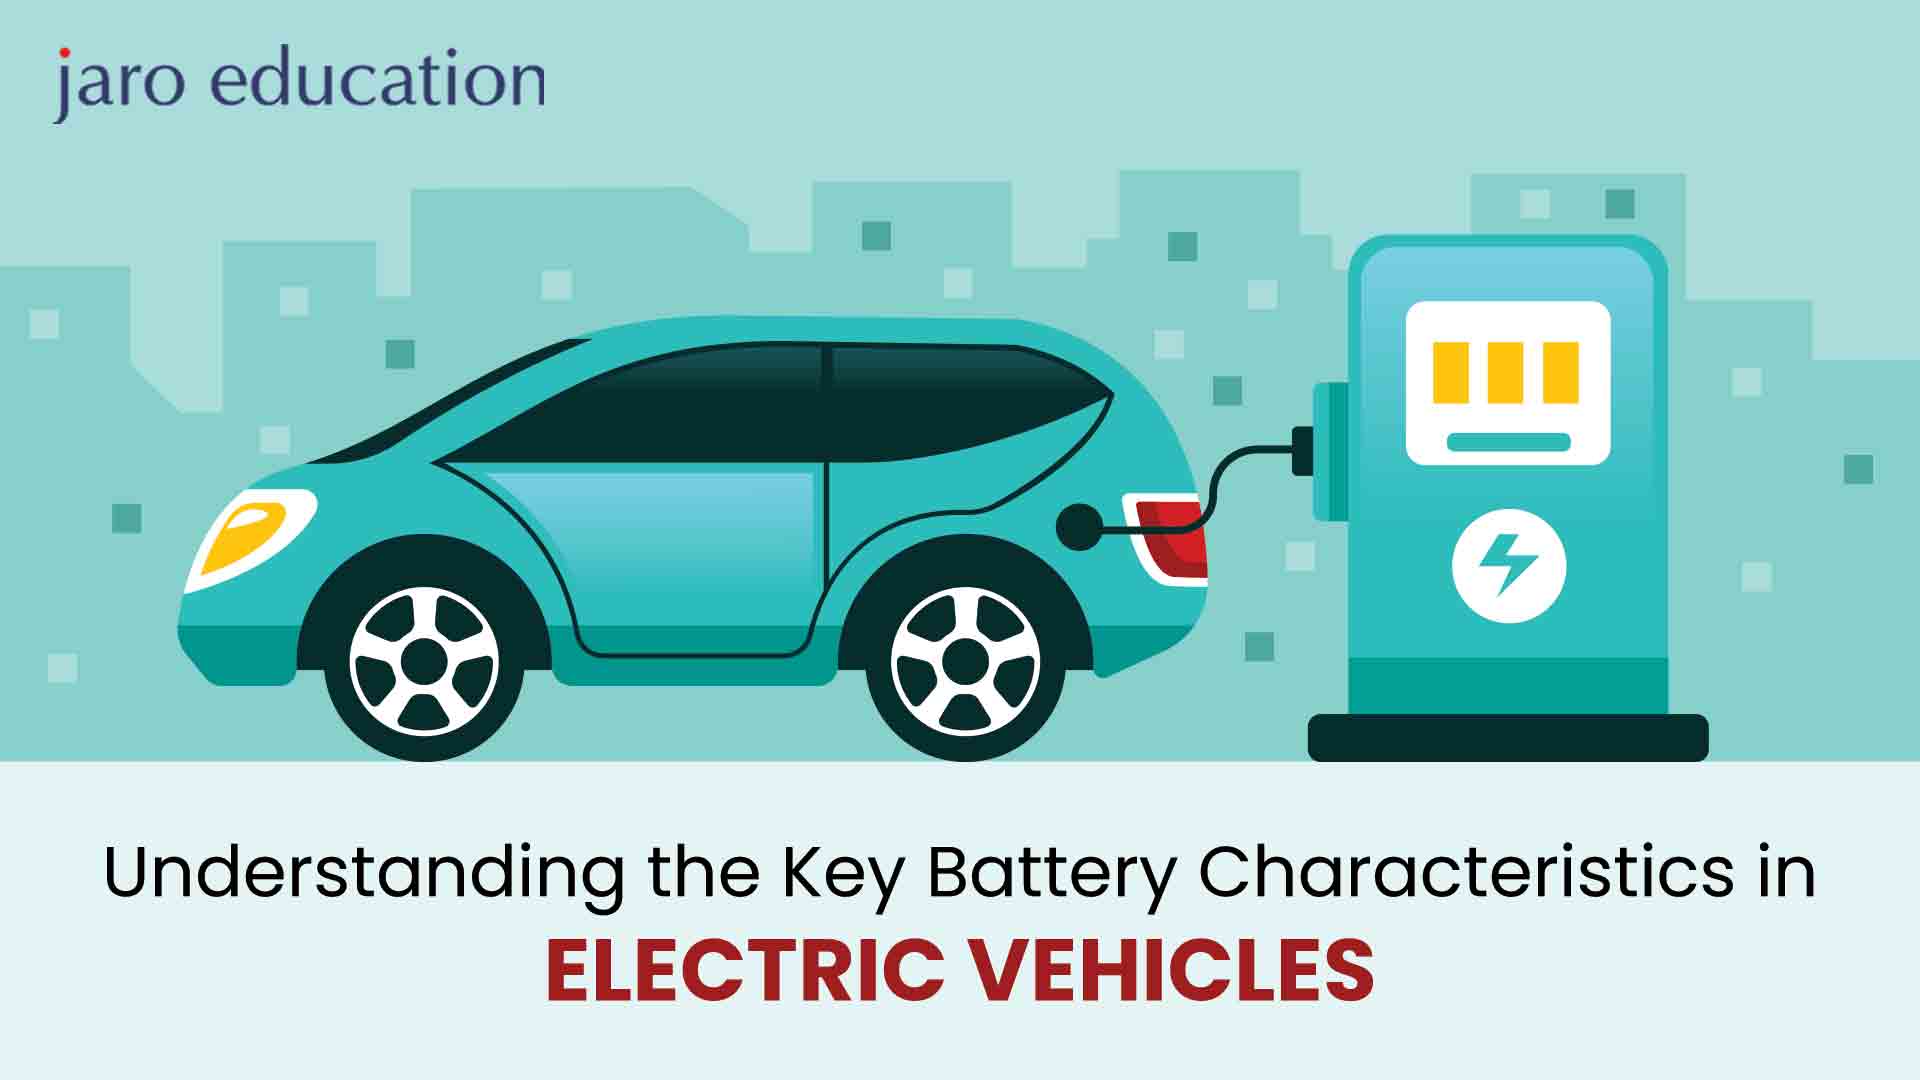 Understanding the Key Battery Characteristics in Electric Vehicles